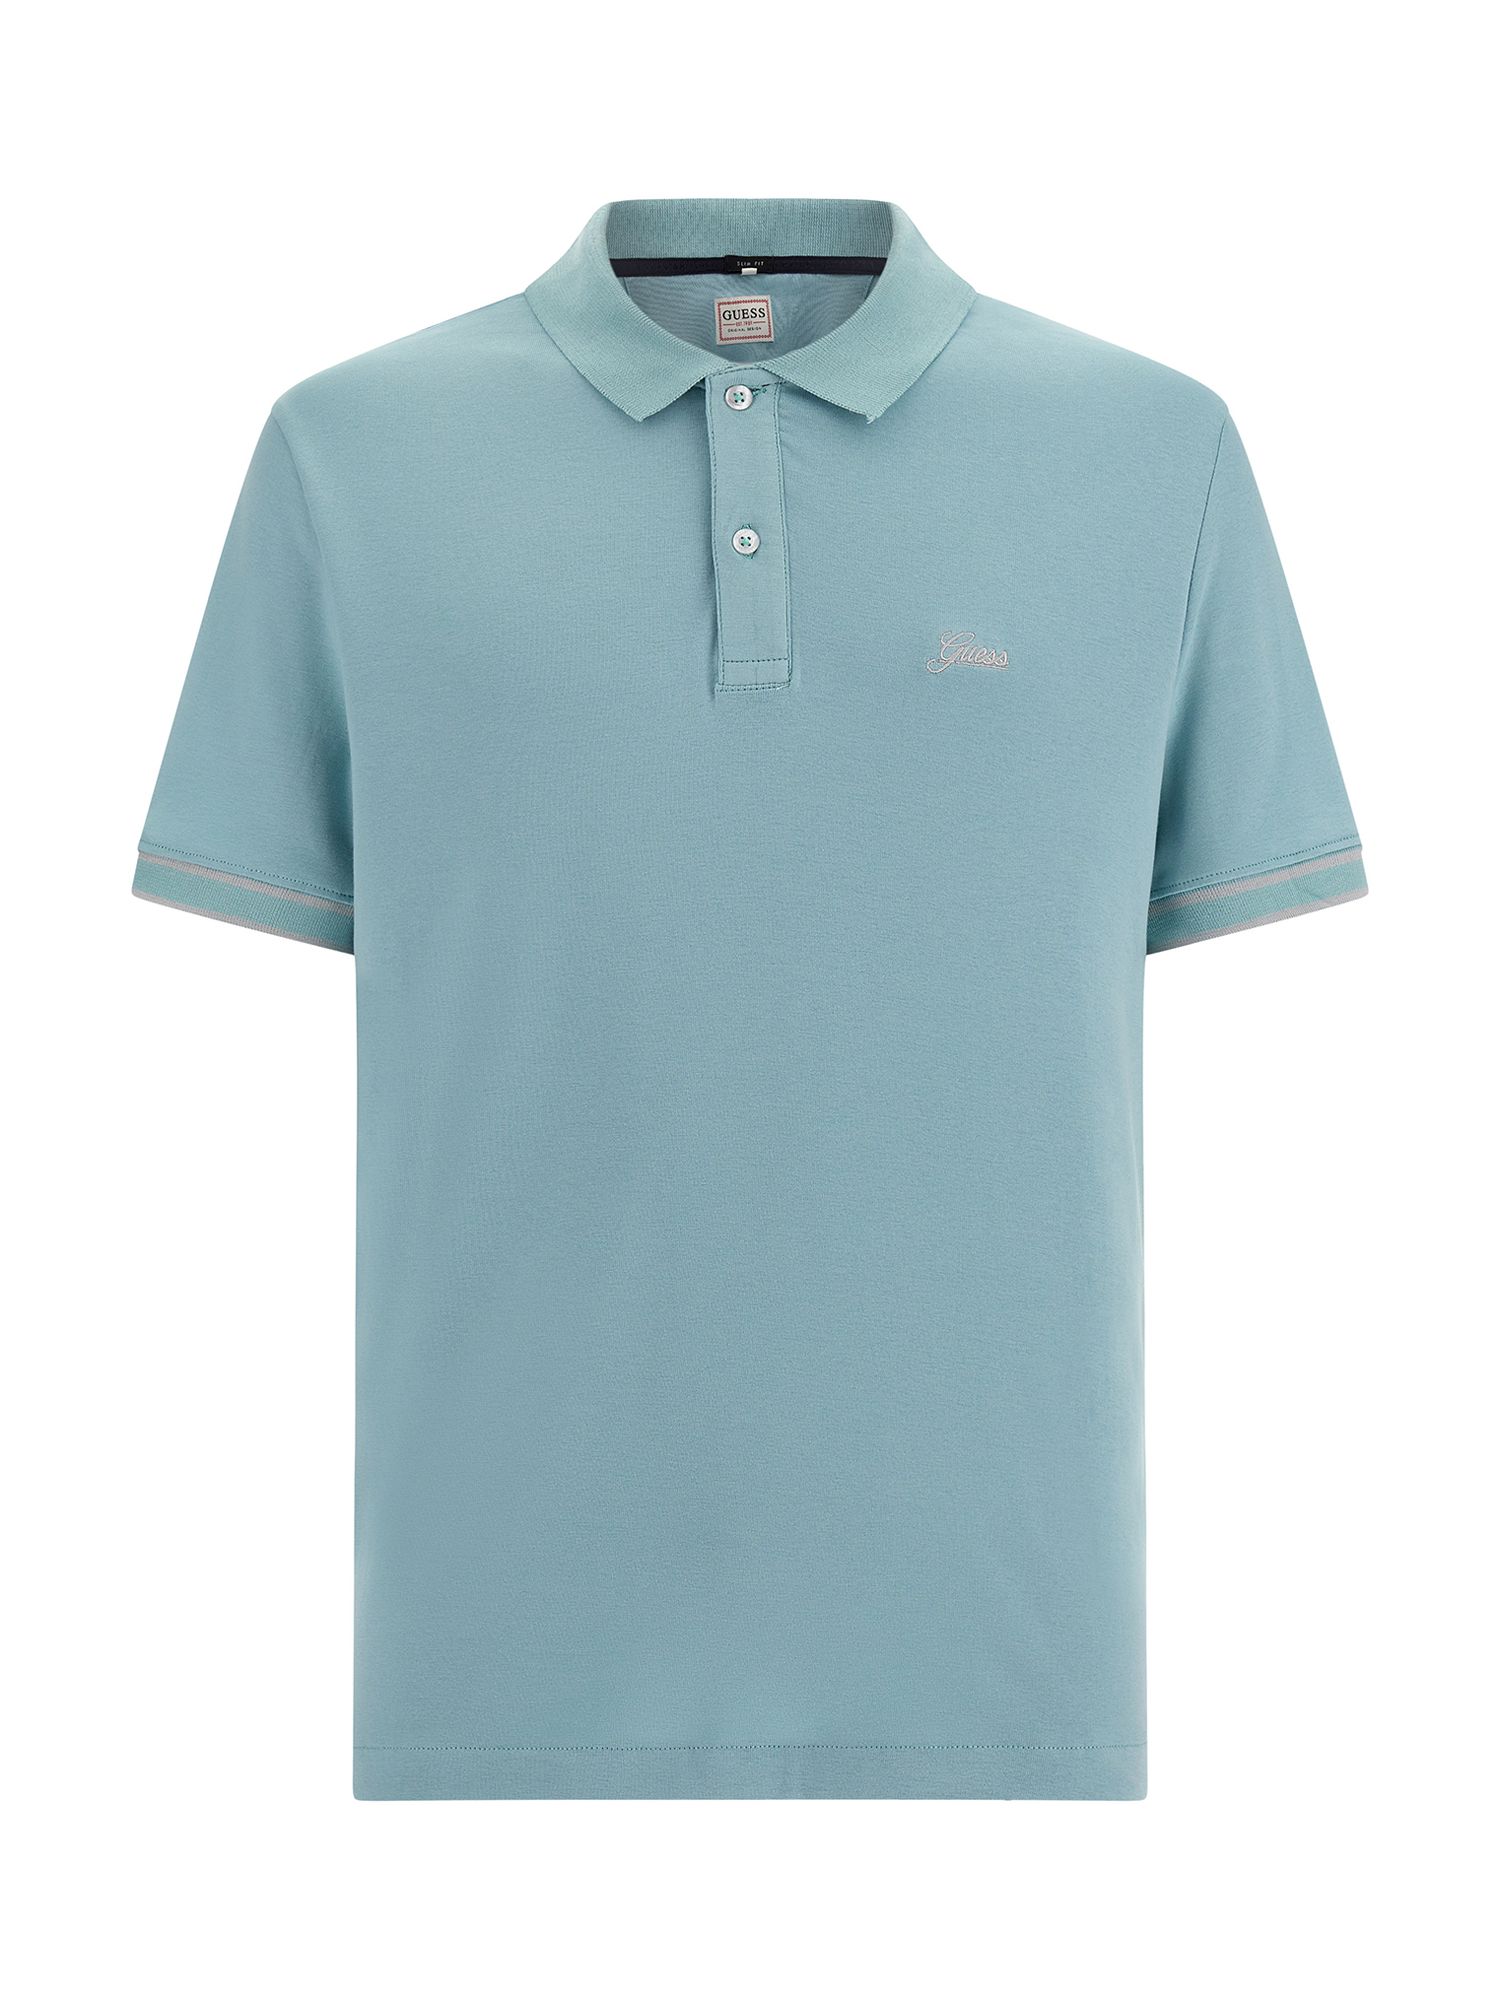 GUESS Oliver Short Sleeve Polo Shirt, Blue at John Lewis & Partners